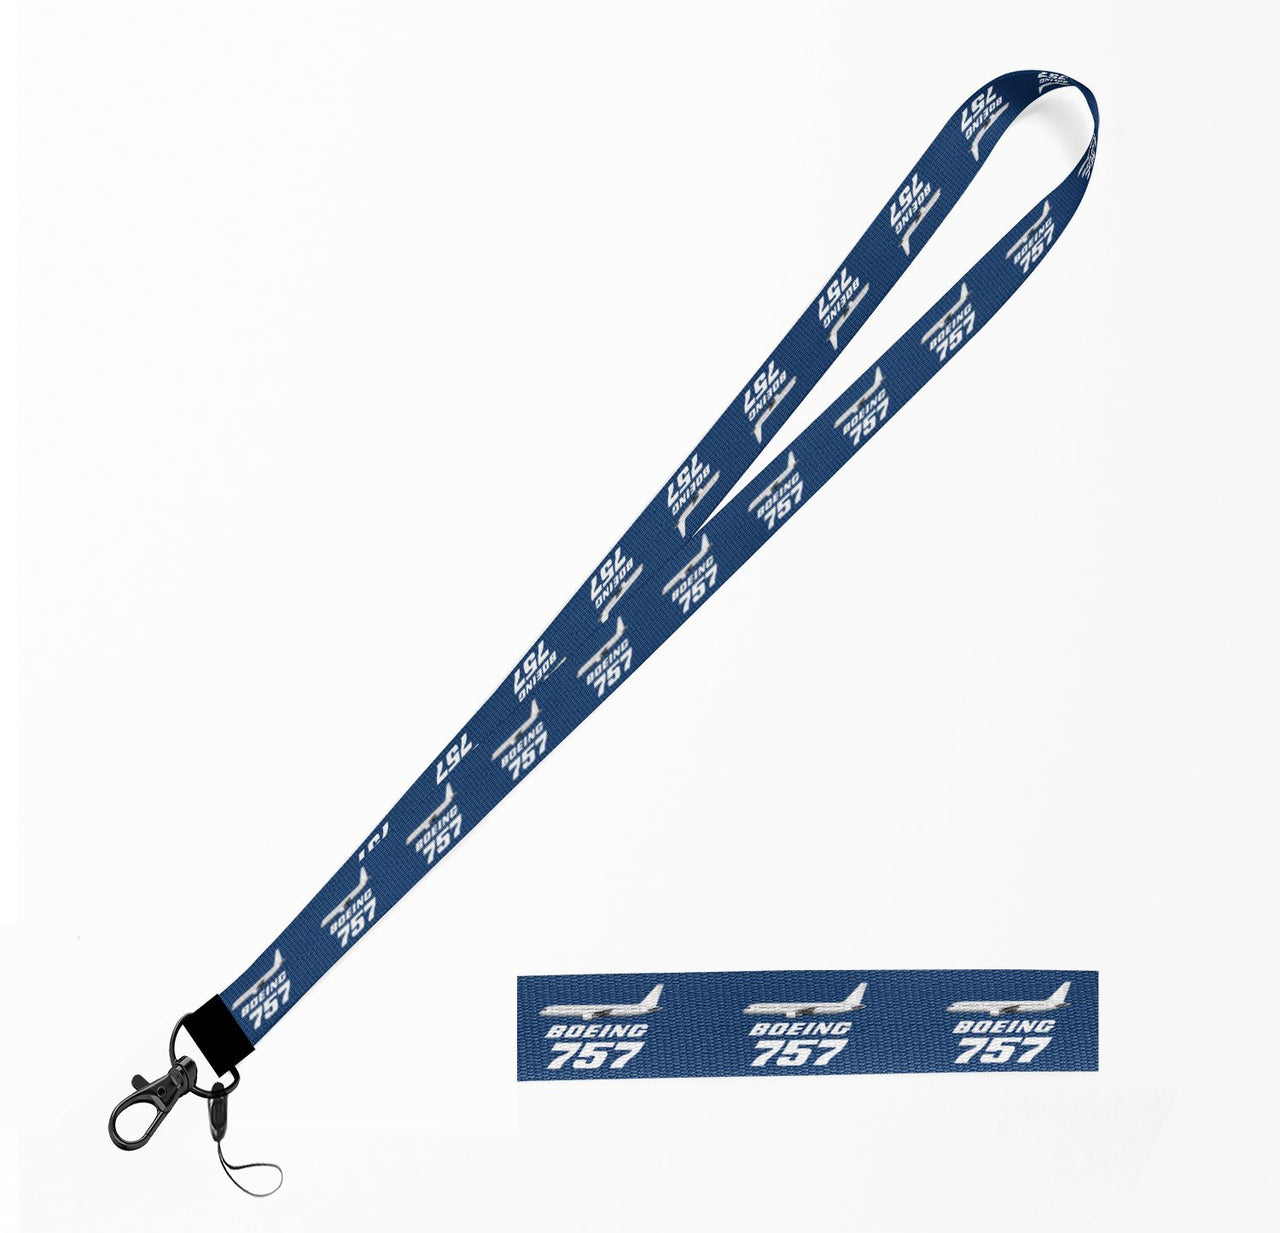 The Boeing 757 Designed Lanyard & ID Holders